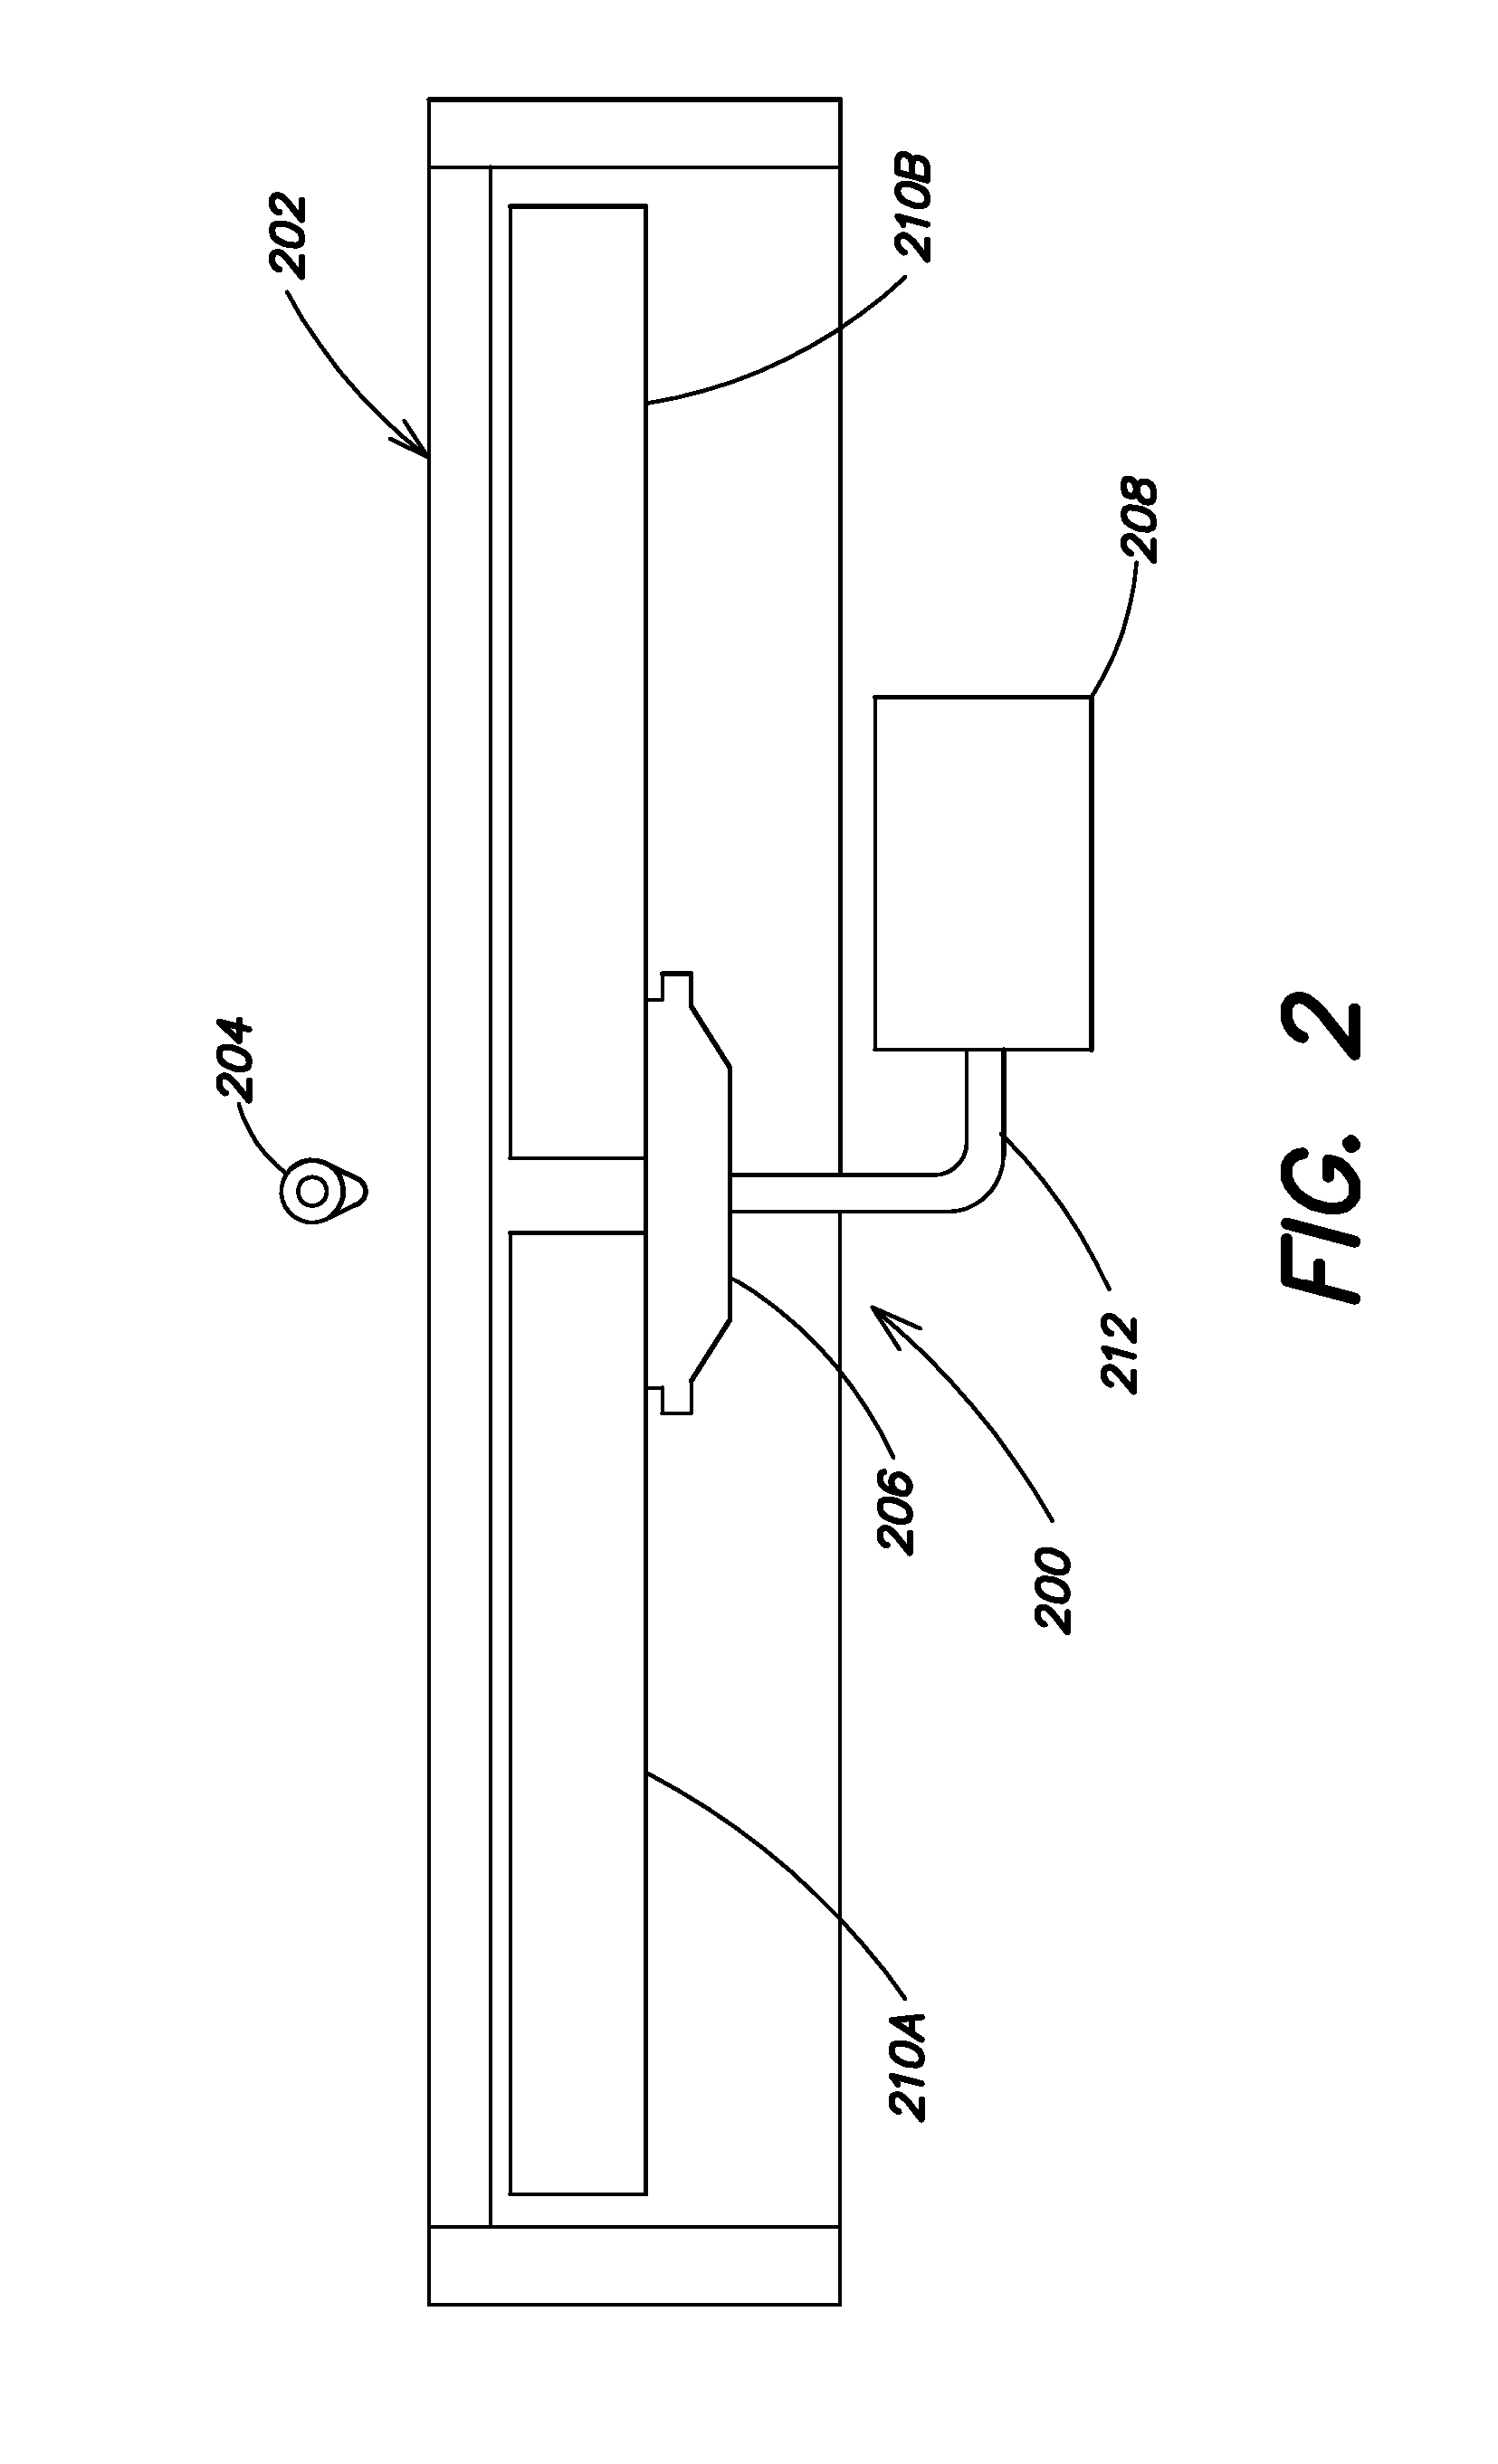 Method and apparatus for monitoring and controlling pressure in an inflatable device